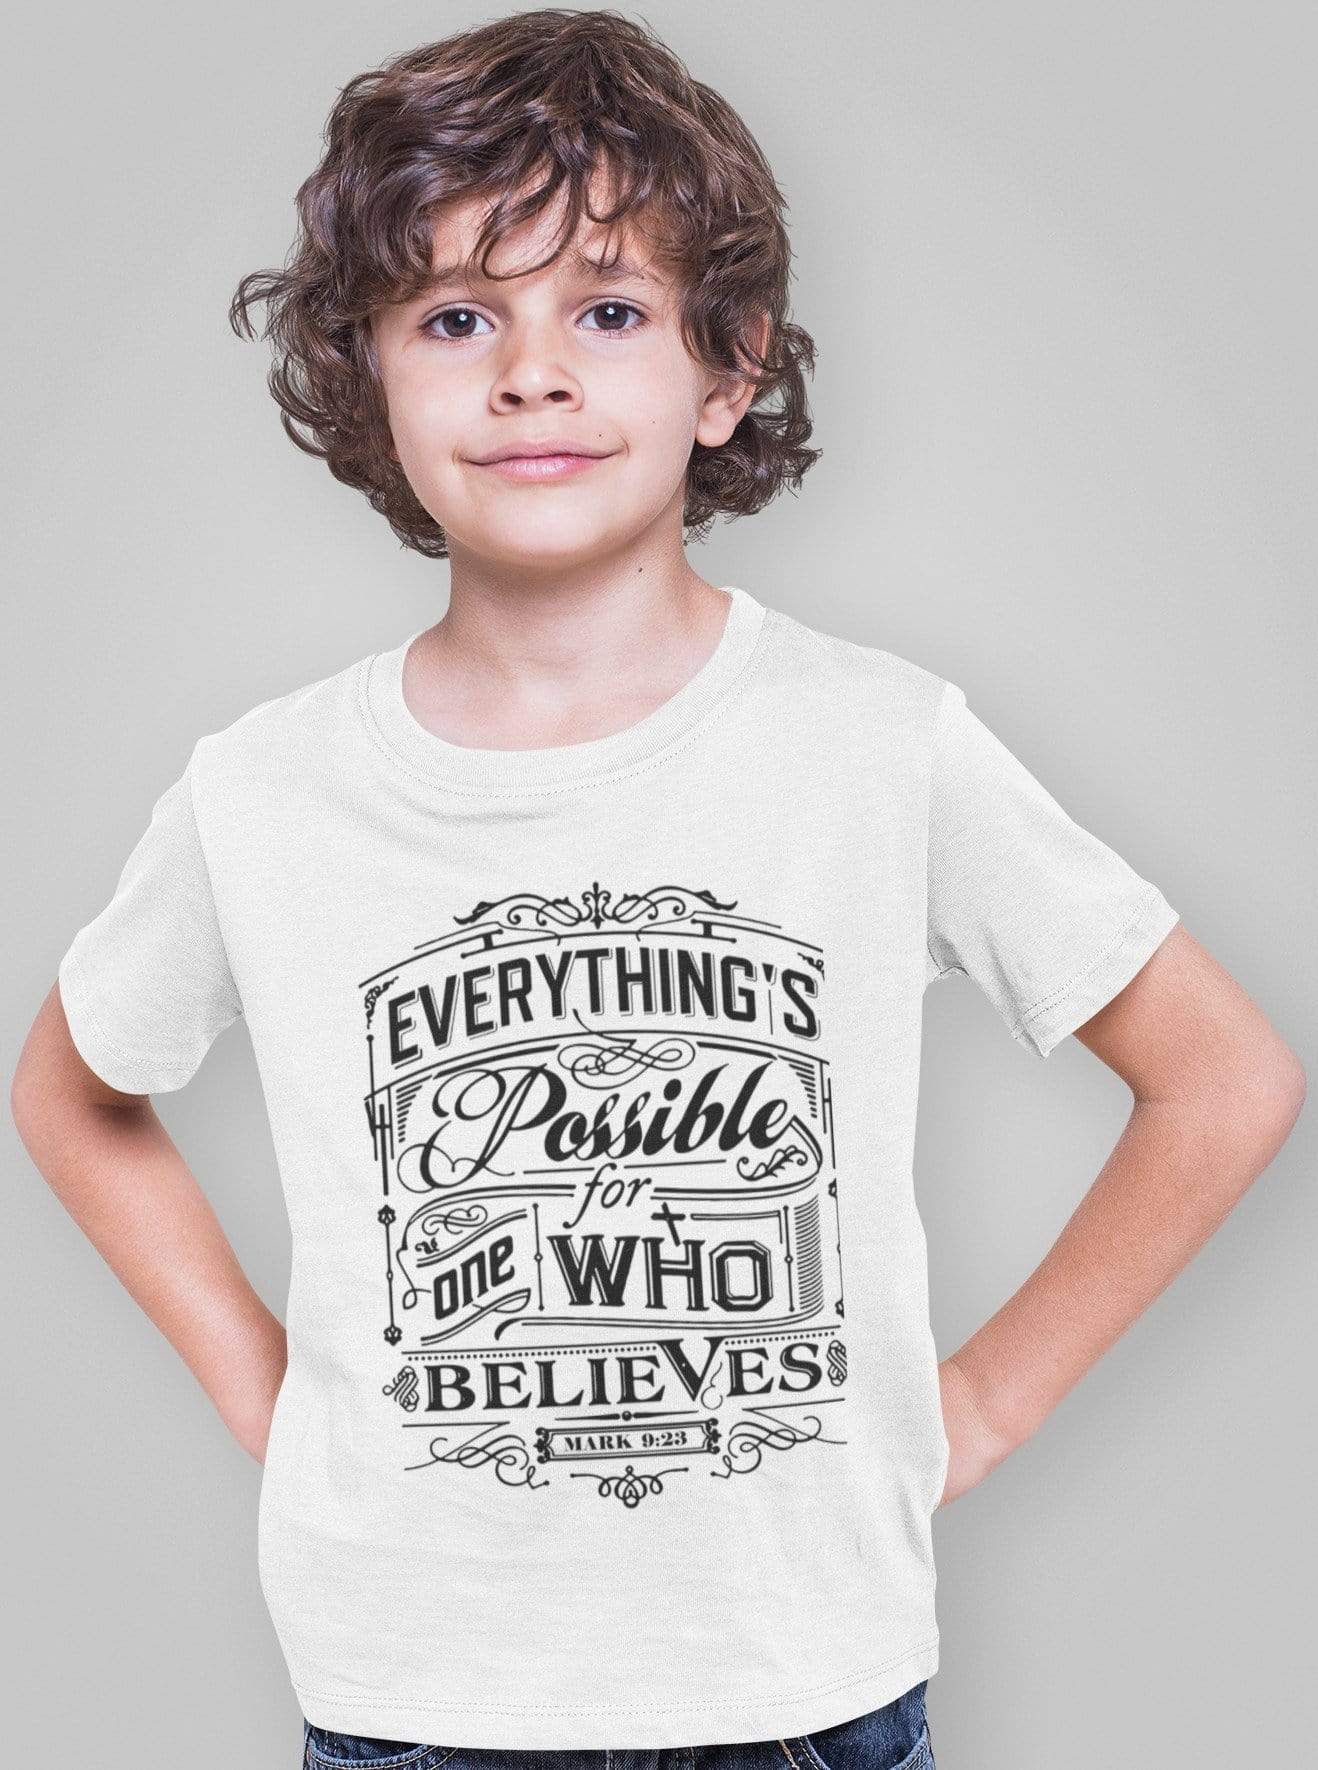 Living Words Kids Round Neck T Shirt Boy / 0-12 Mn / White Everything possible